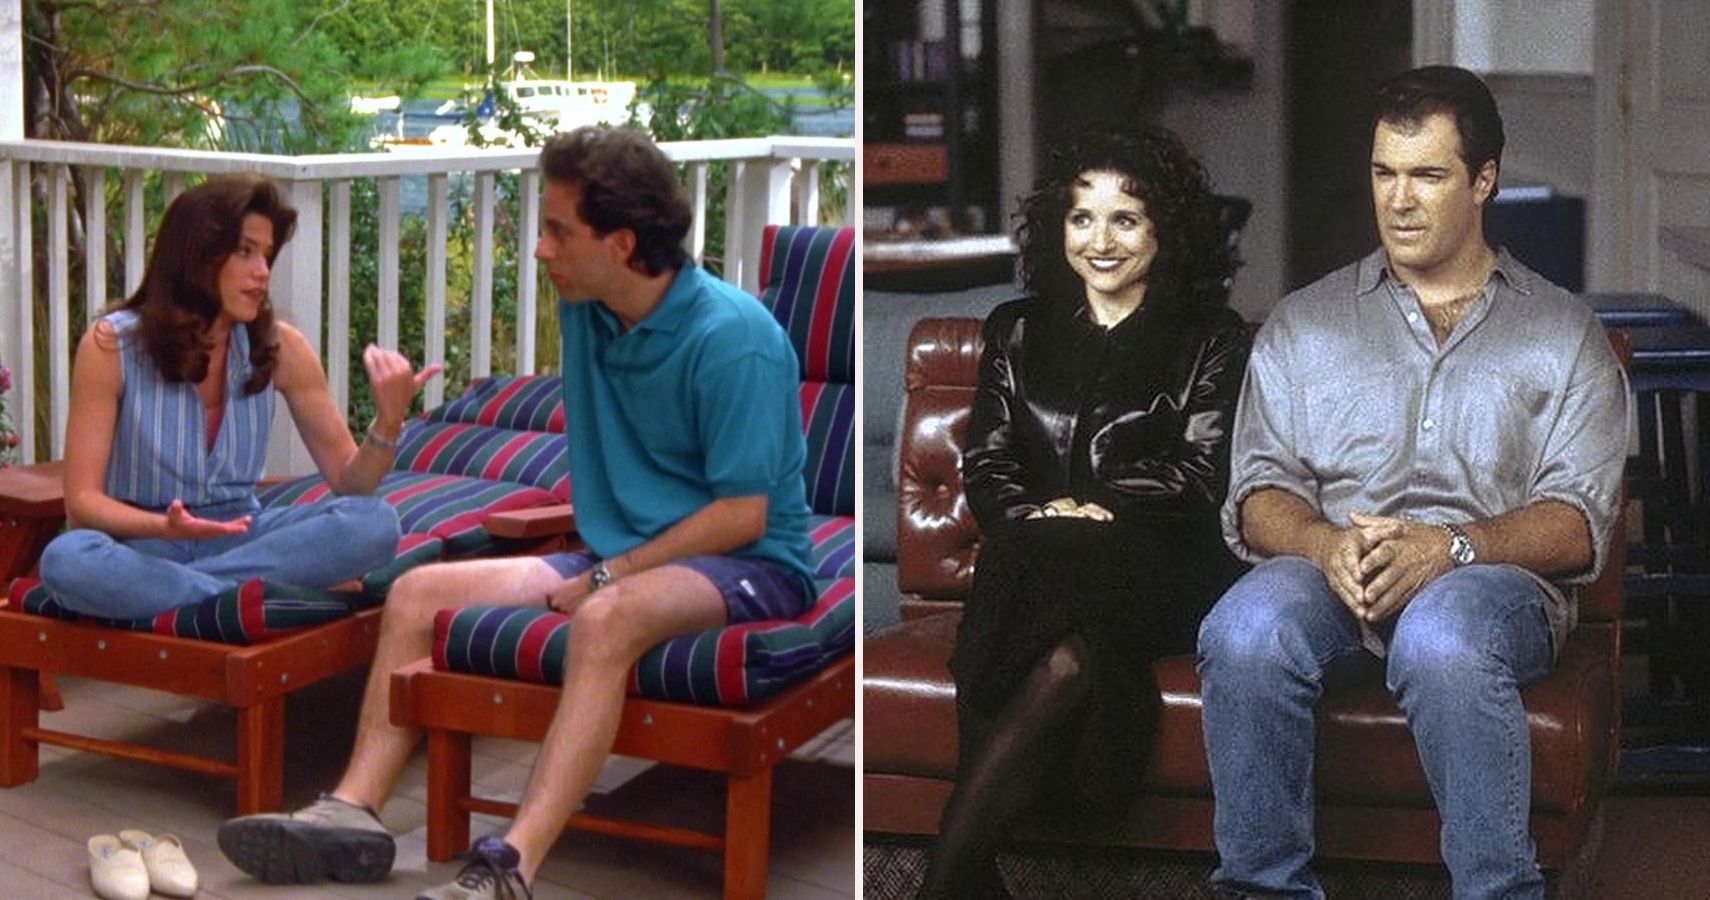 Seinfeld Couples Featured